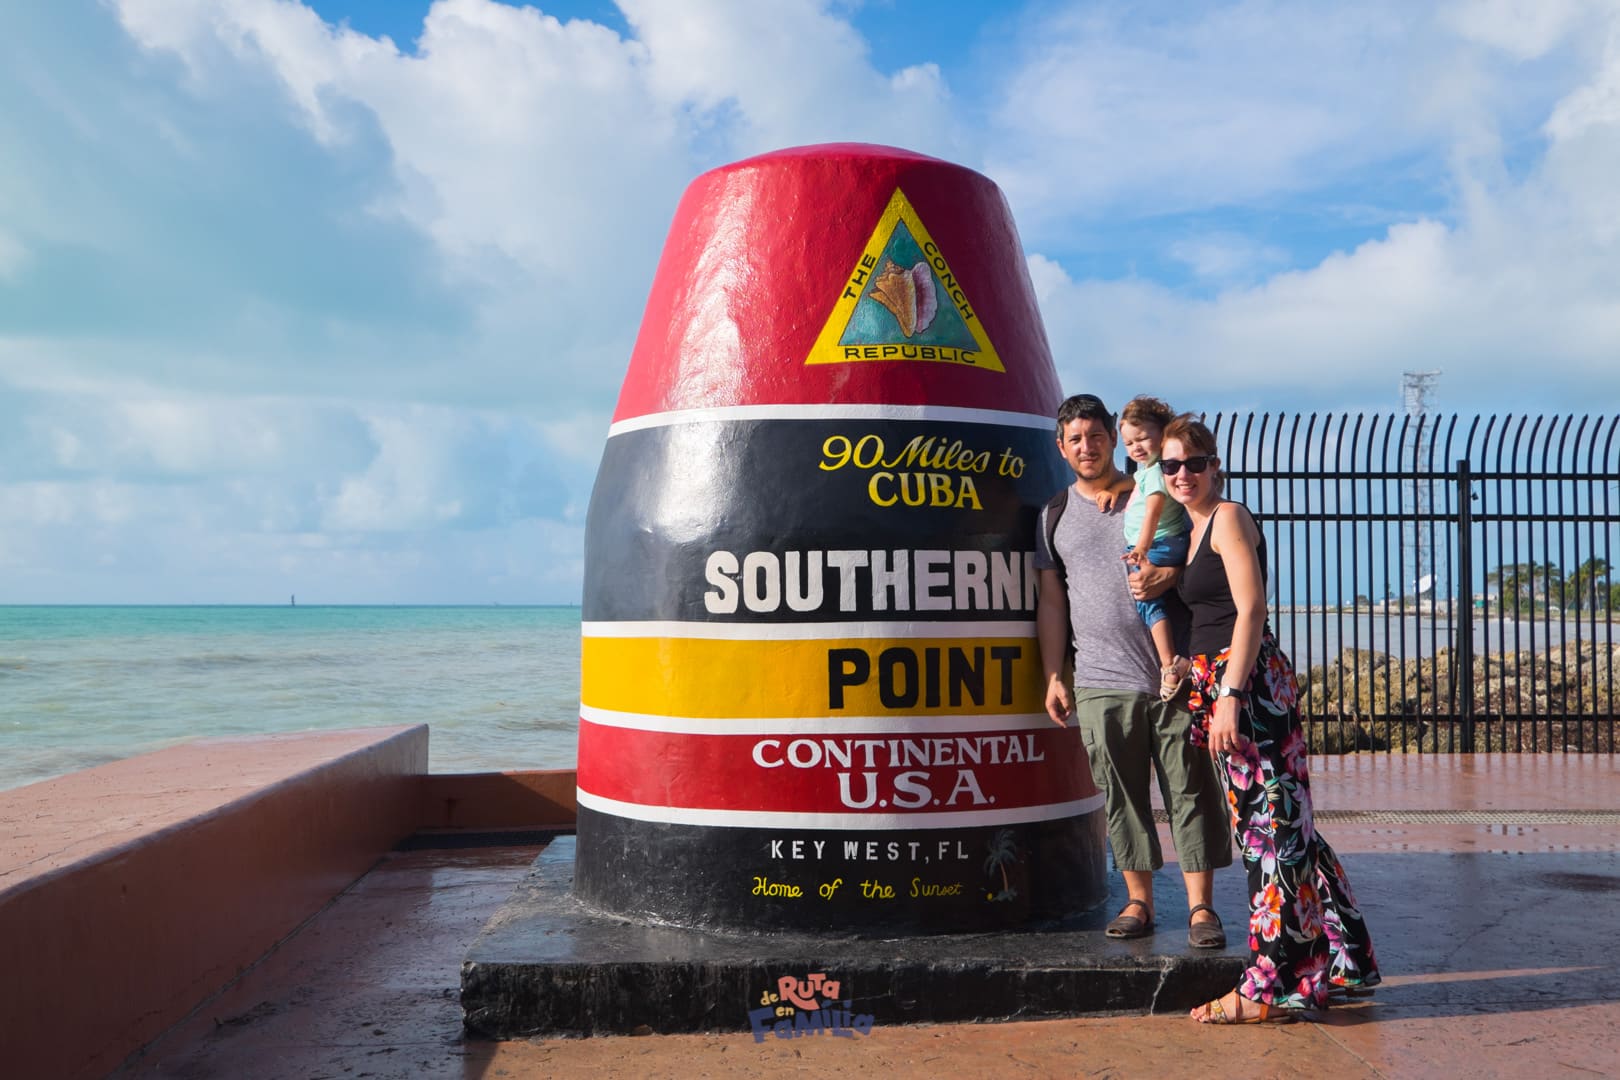 Visitar Key West o Cayo Hueso. Southernmost Point